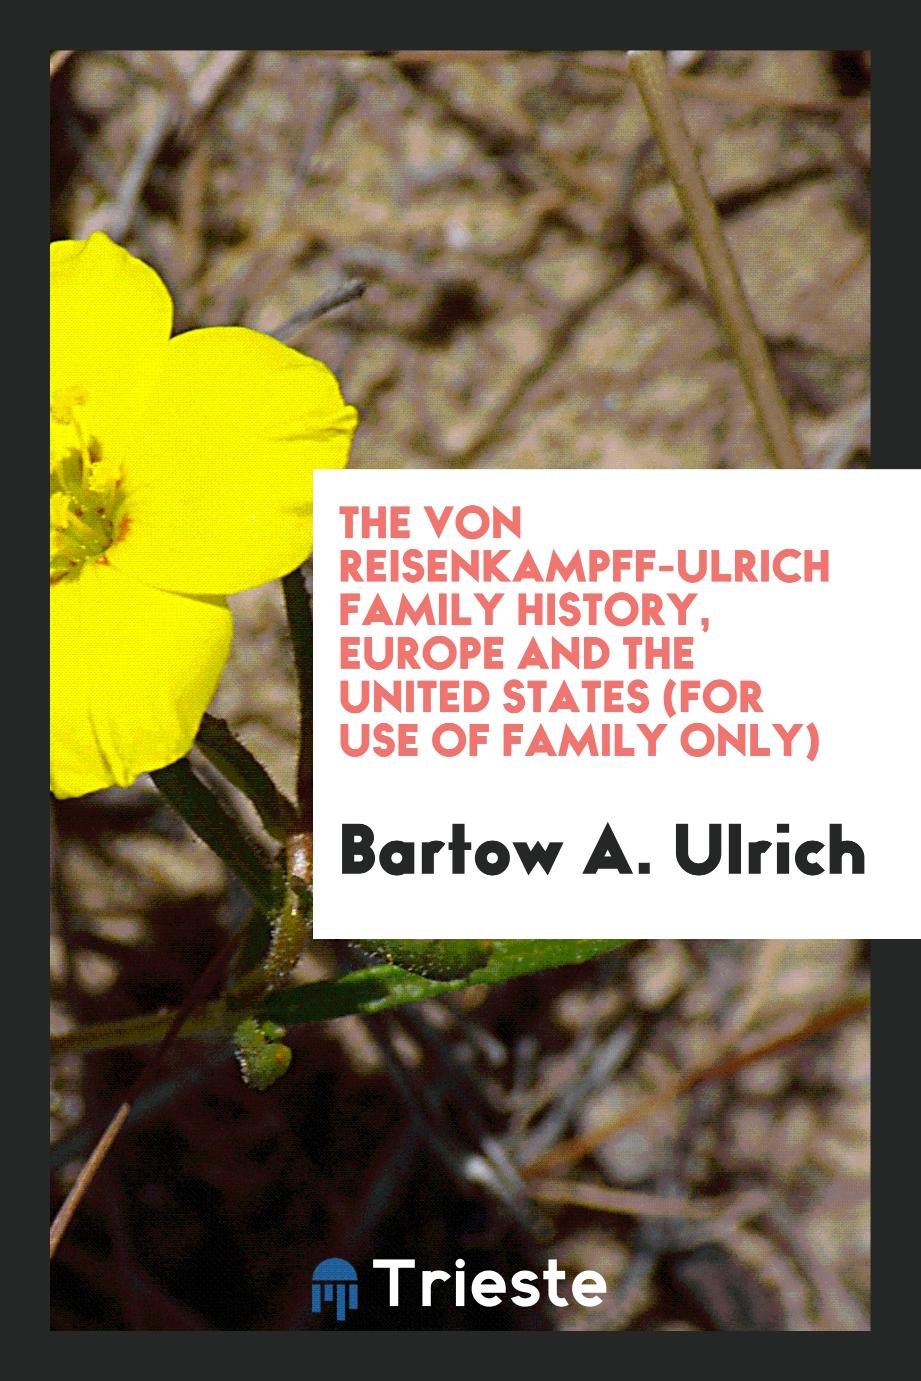 The Von Reisenkampff-Ulrich Family History, Europe and the United States (for Use of Family Only)